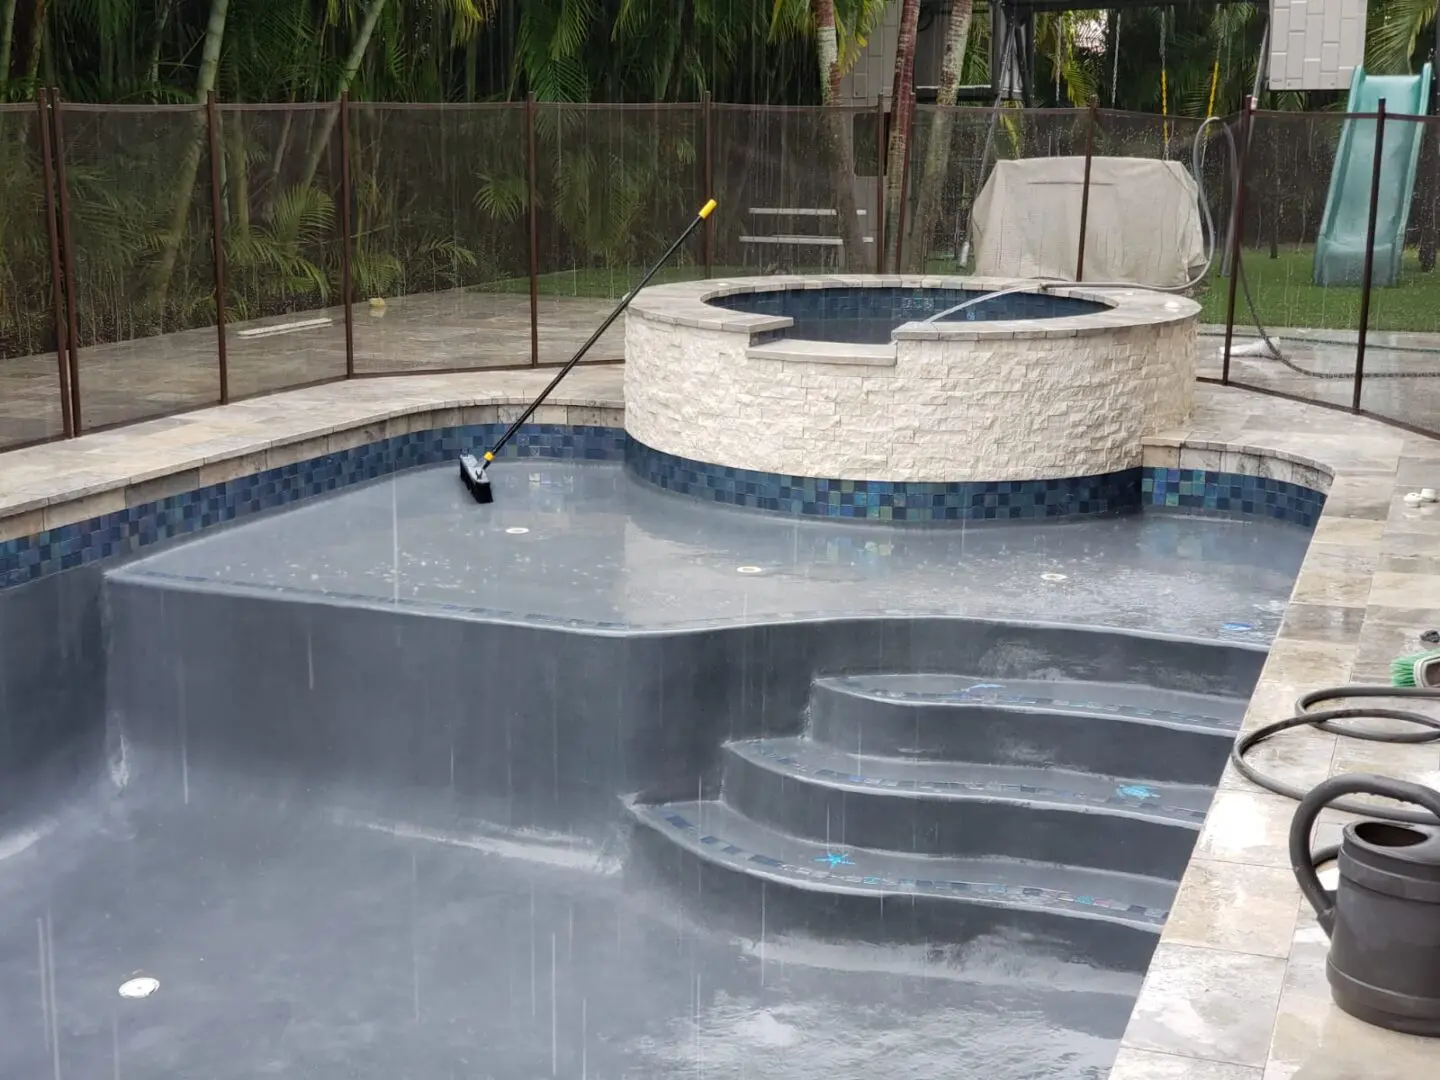 An empty swimming pool and hot tub with a cleaning tool inside, surrounded by a safety fence. The pool and hot tub surfaces are wet, and hoses are lying nearby.